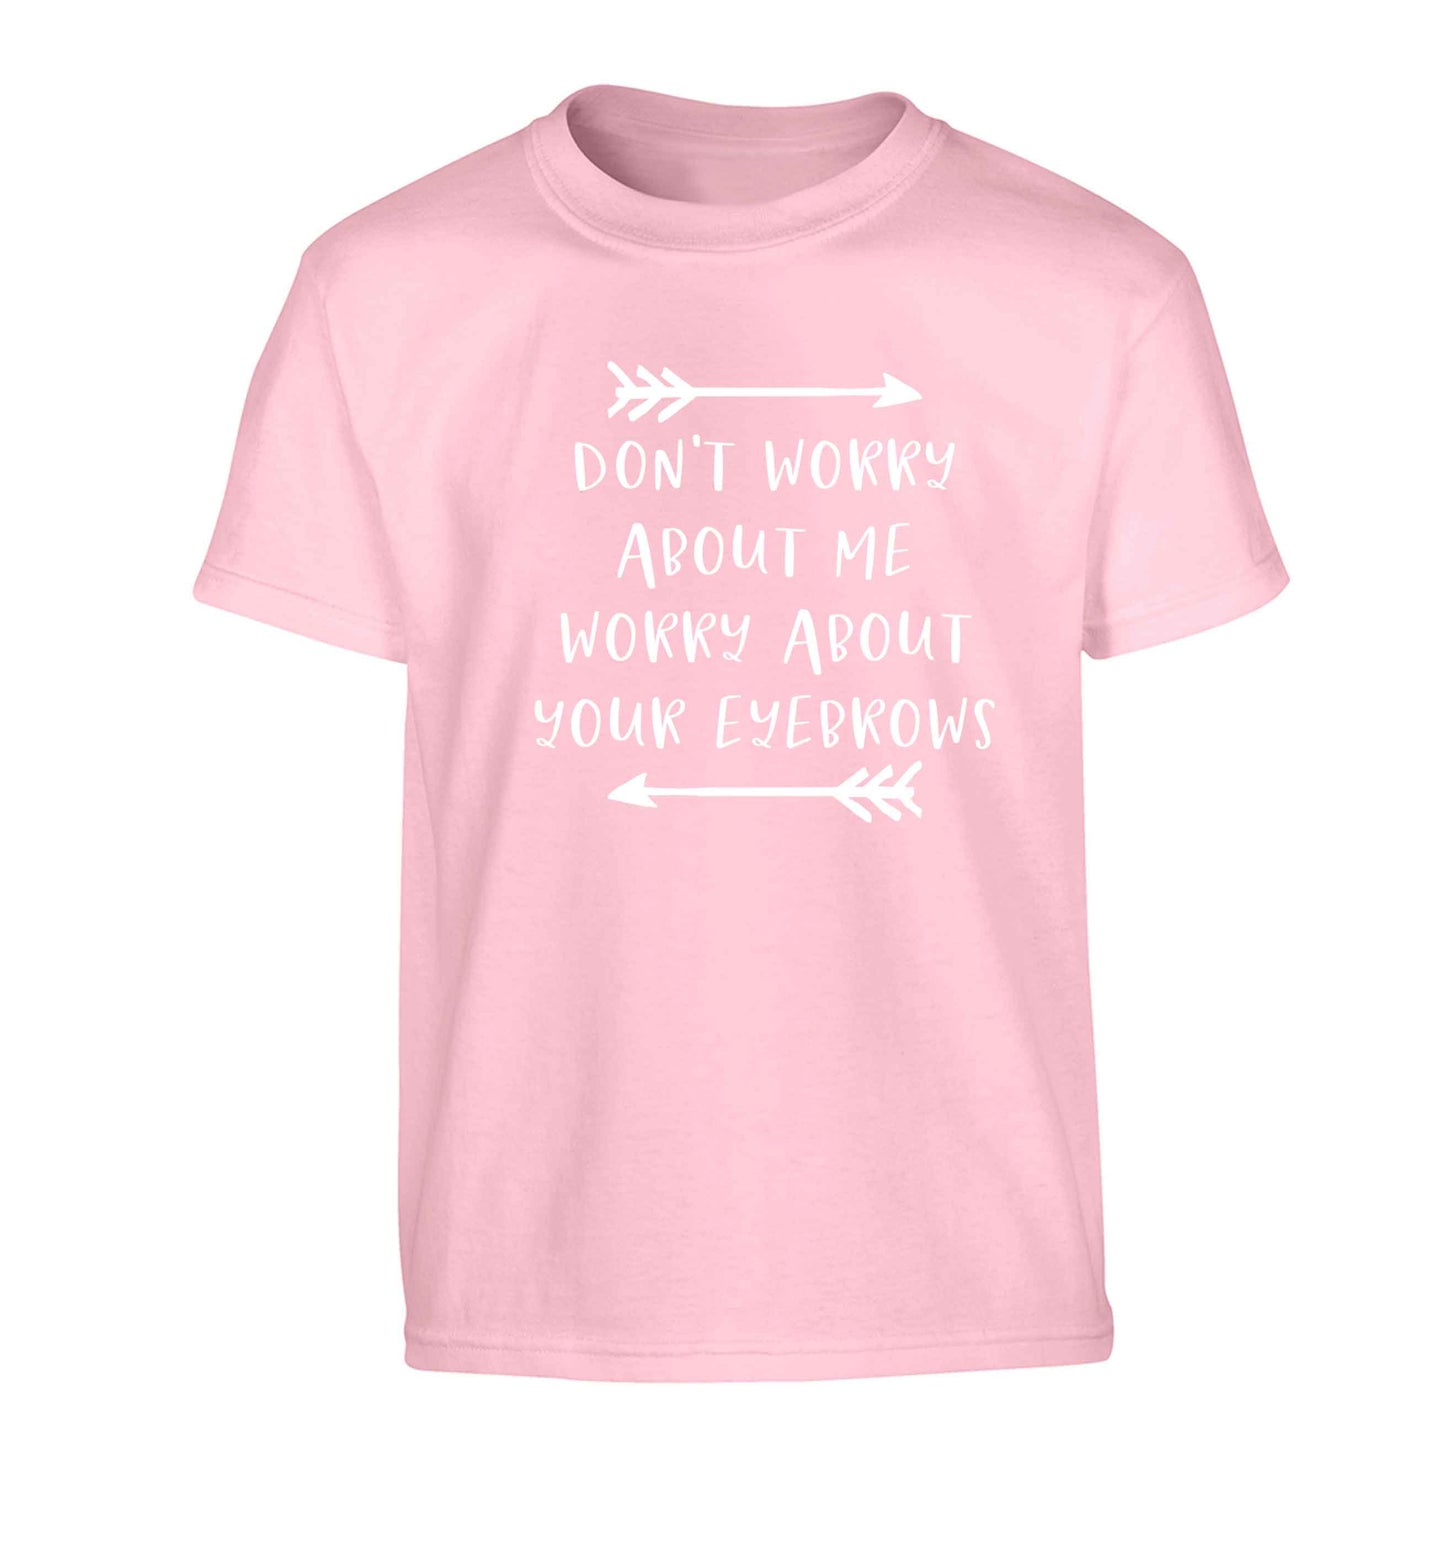 Don't worry about me worry about your eyebrows Children's light pink Tshirt 12-13 Years